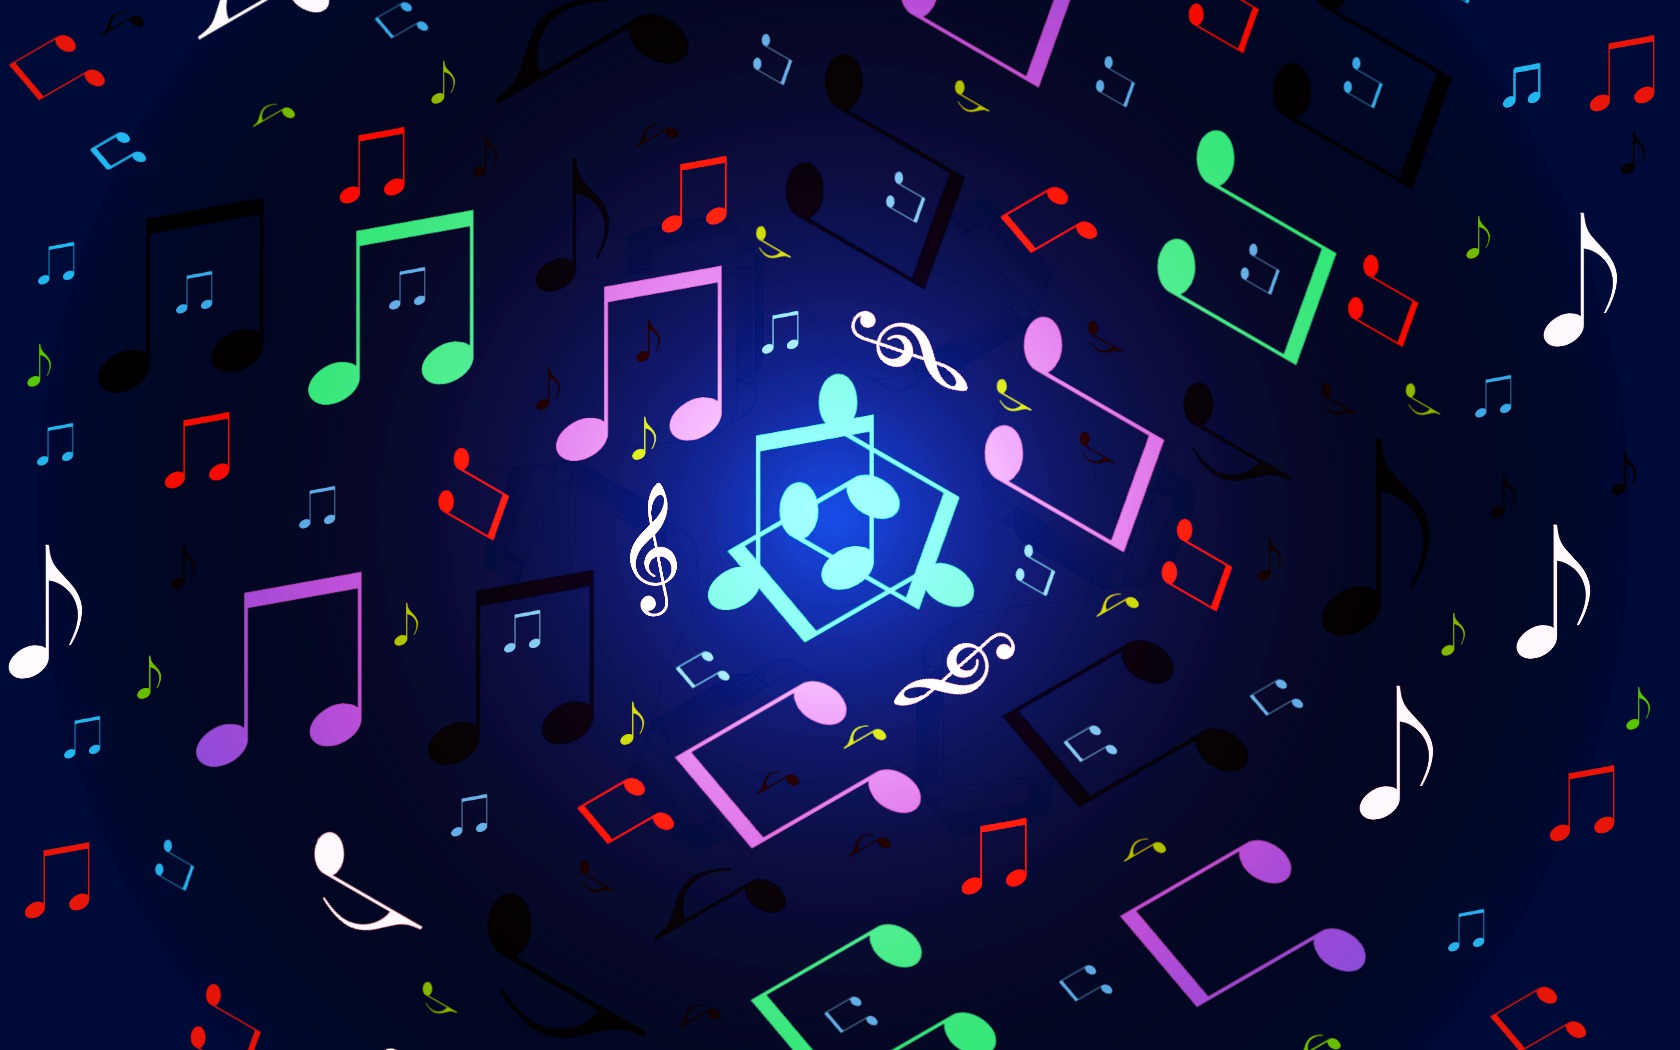 Free download Music Notes Wallpaper 10195 Hd Wallpapers in Music